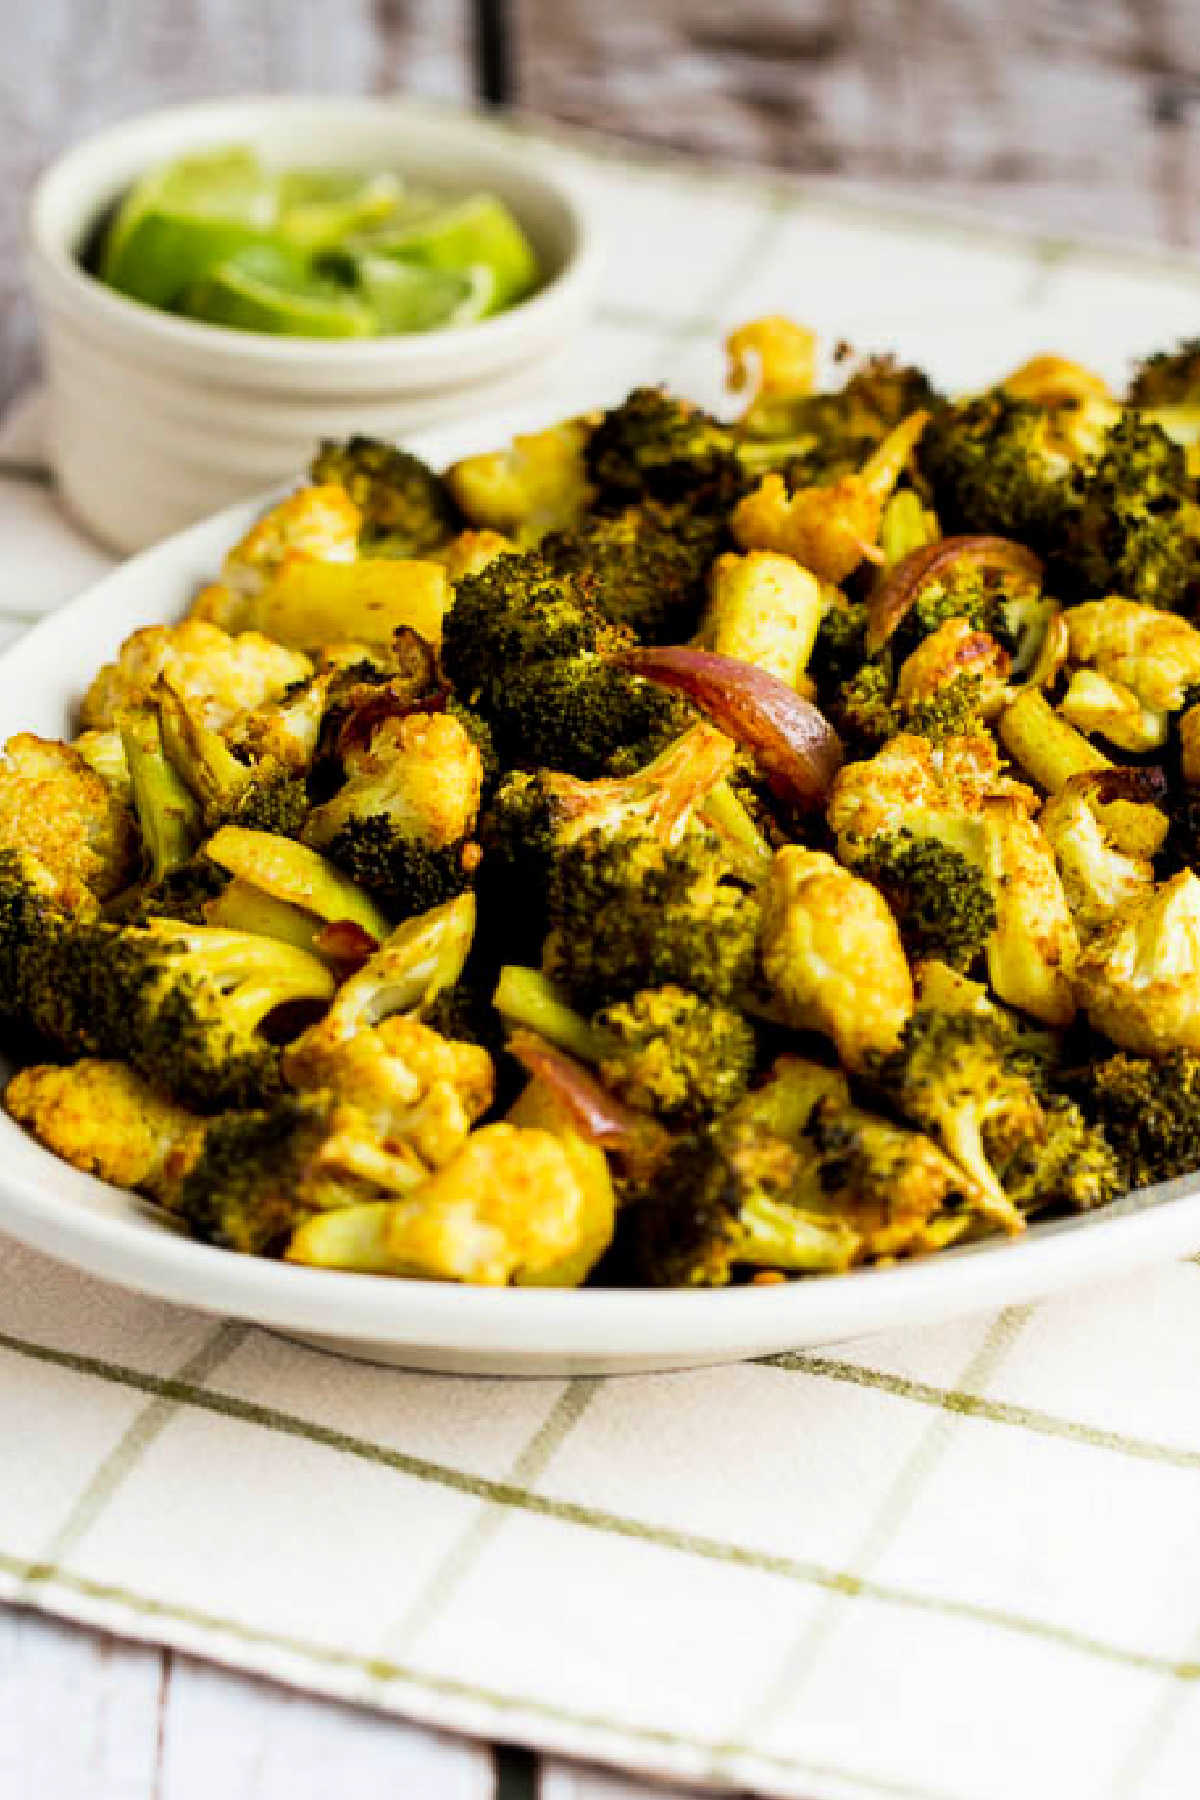 Roasted Broccoli and Cauliflower shown on serving plate 